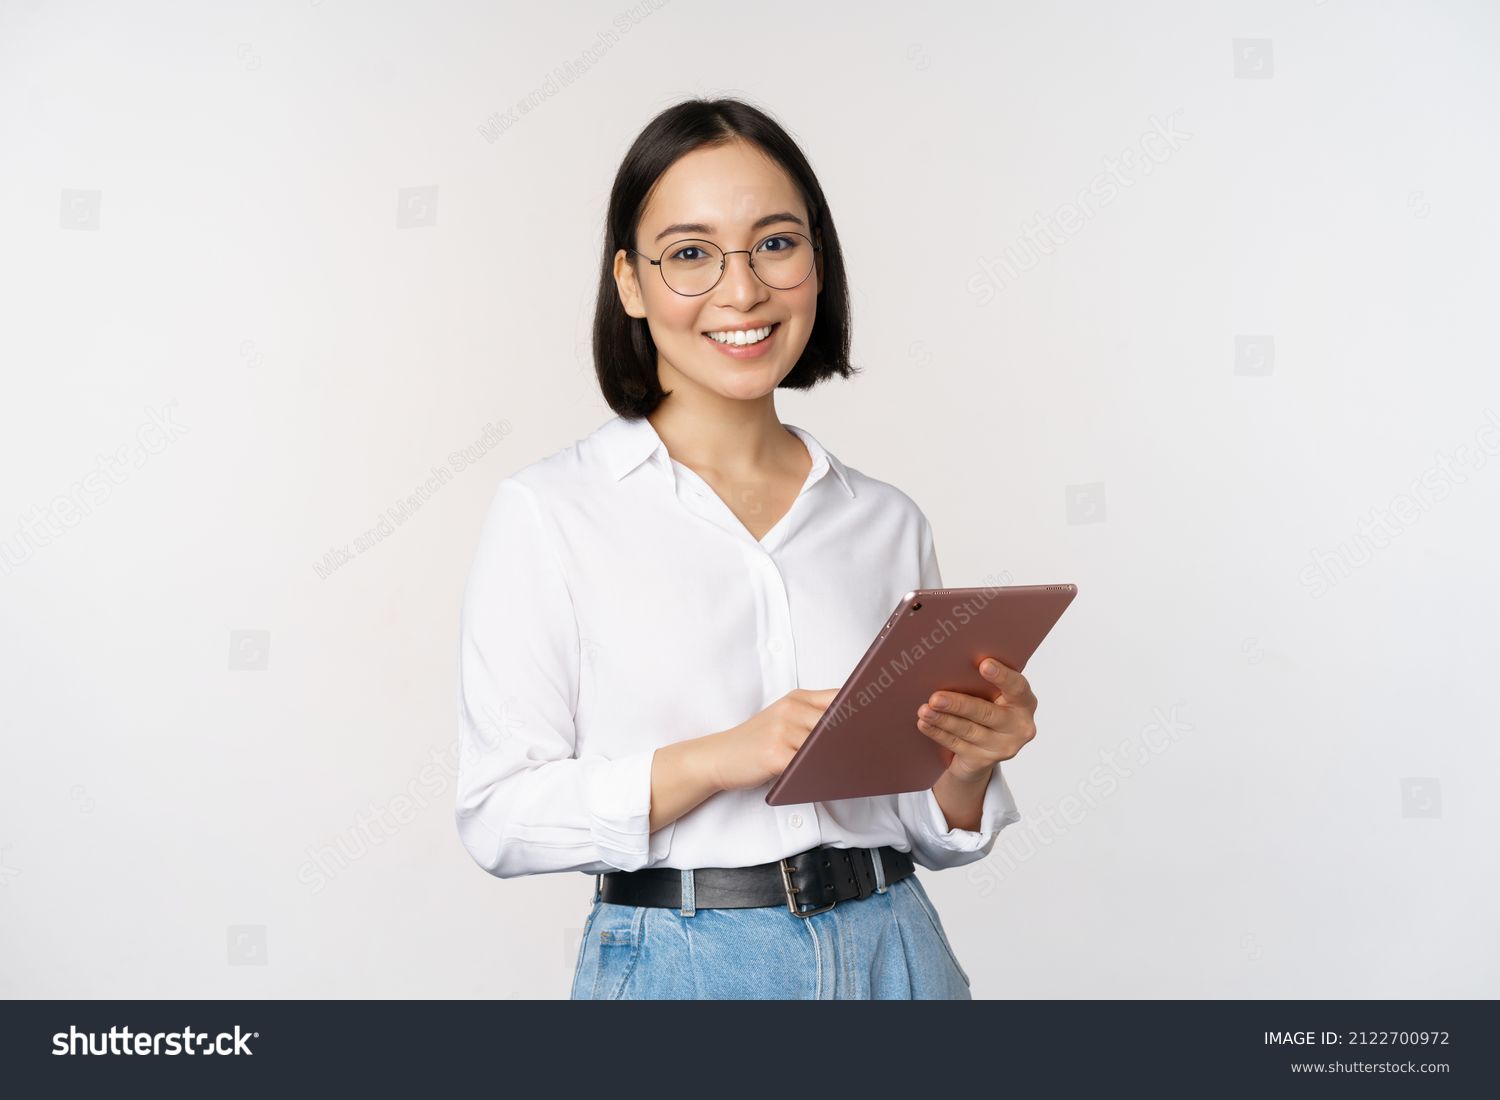 Image of young asian woman, company worker in glasses, smiling and holding digital tablet, standing over white background #2122700972